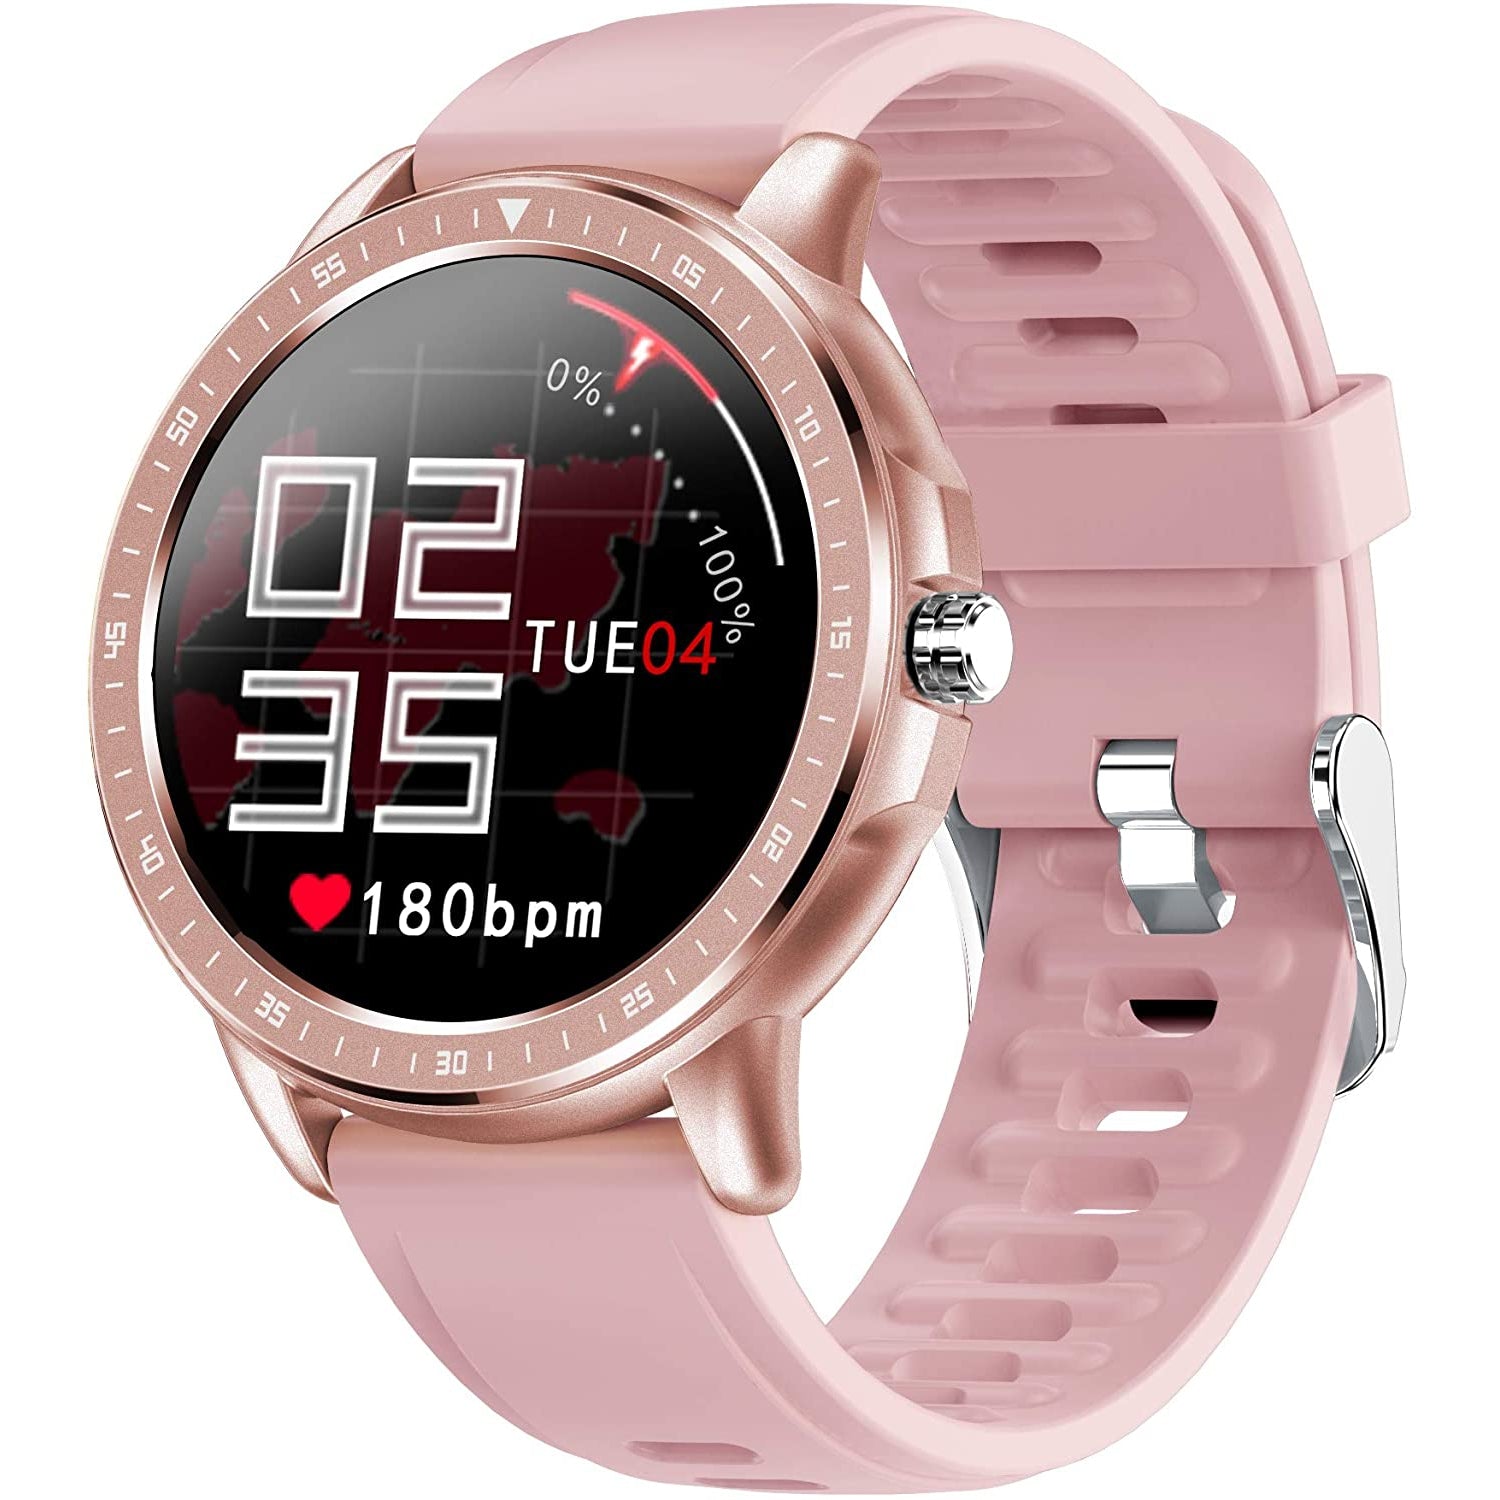 BYTTRON CF19 Fitness Tracker Watch with Heart Rate Monitor